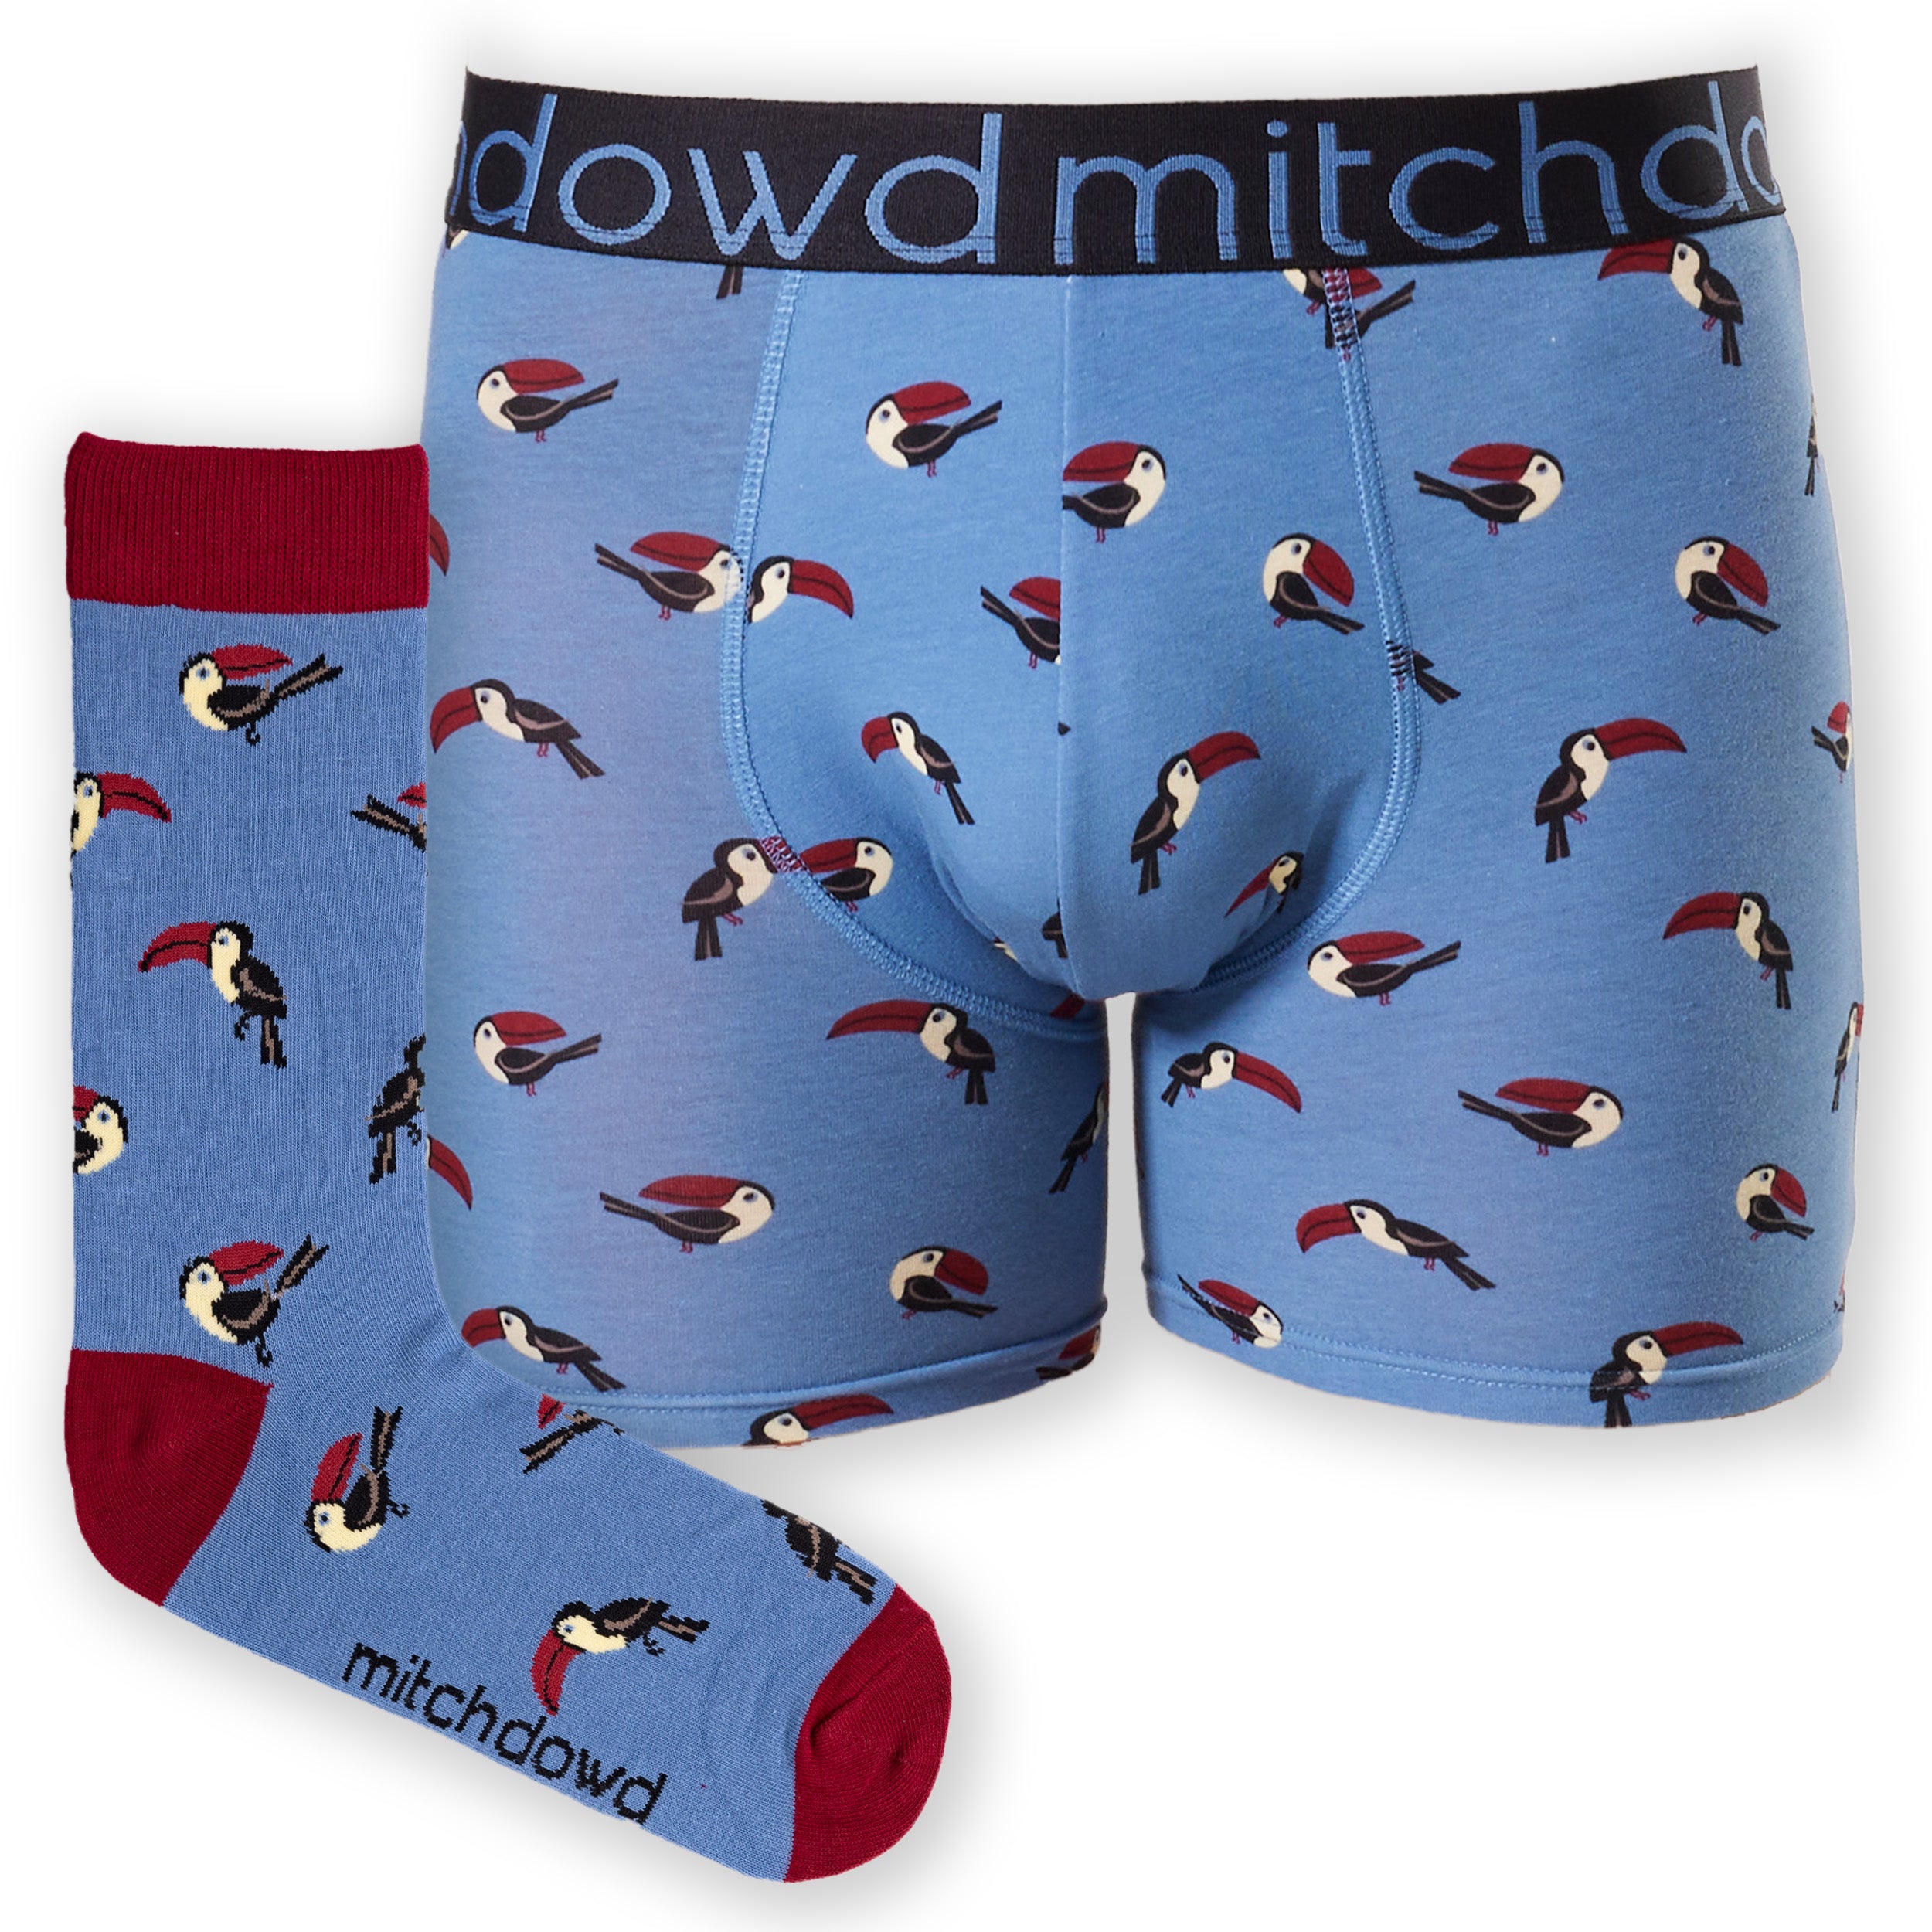 Mitch Dowd Men's Christmas Satin Boxers - Red